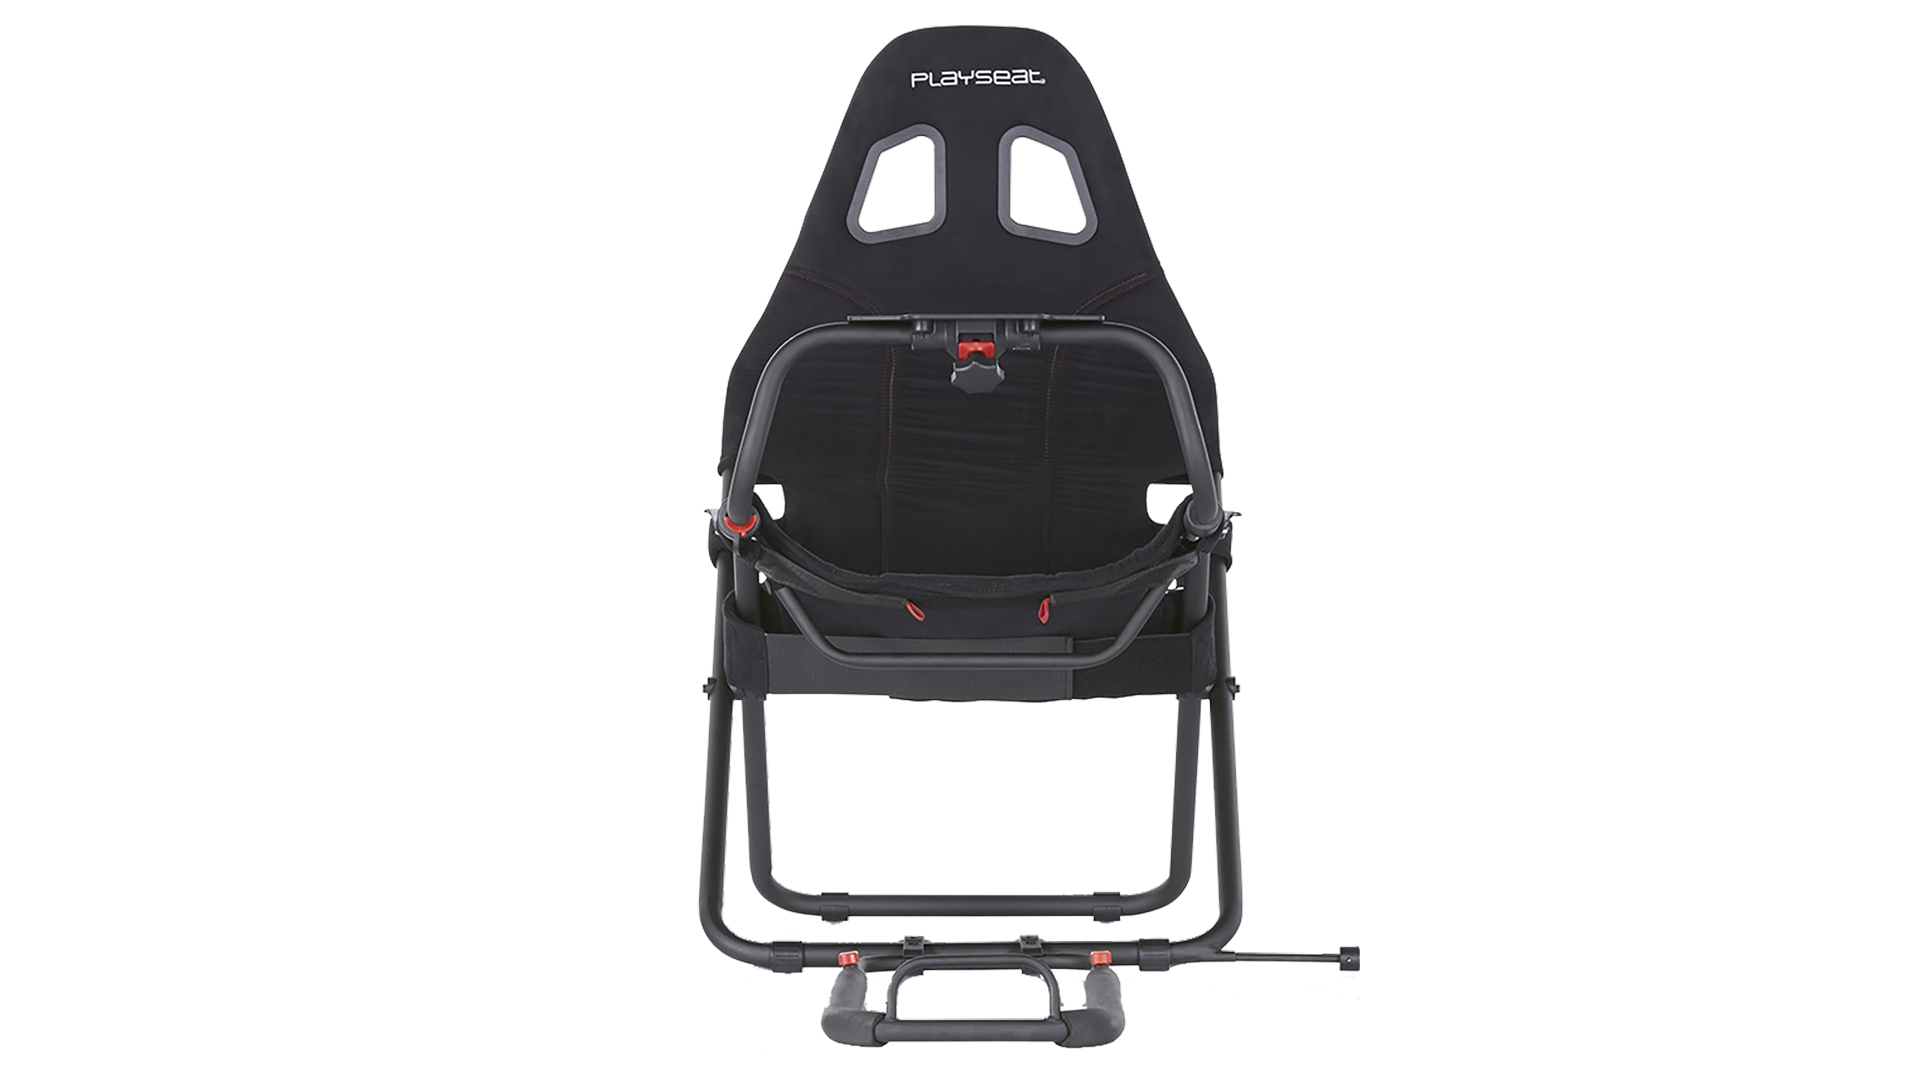 Playseat Challenge review: A superb starter racing seat for gamers